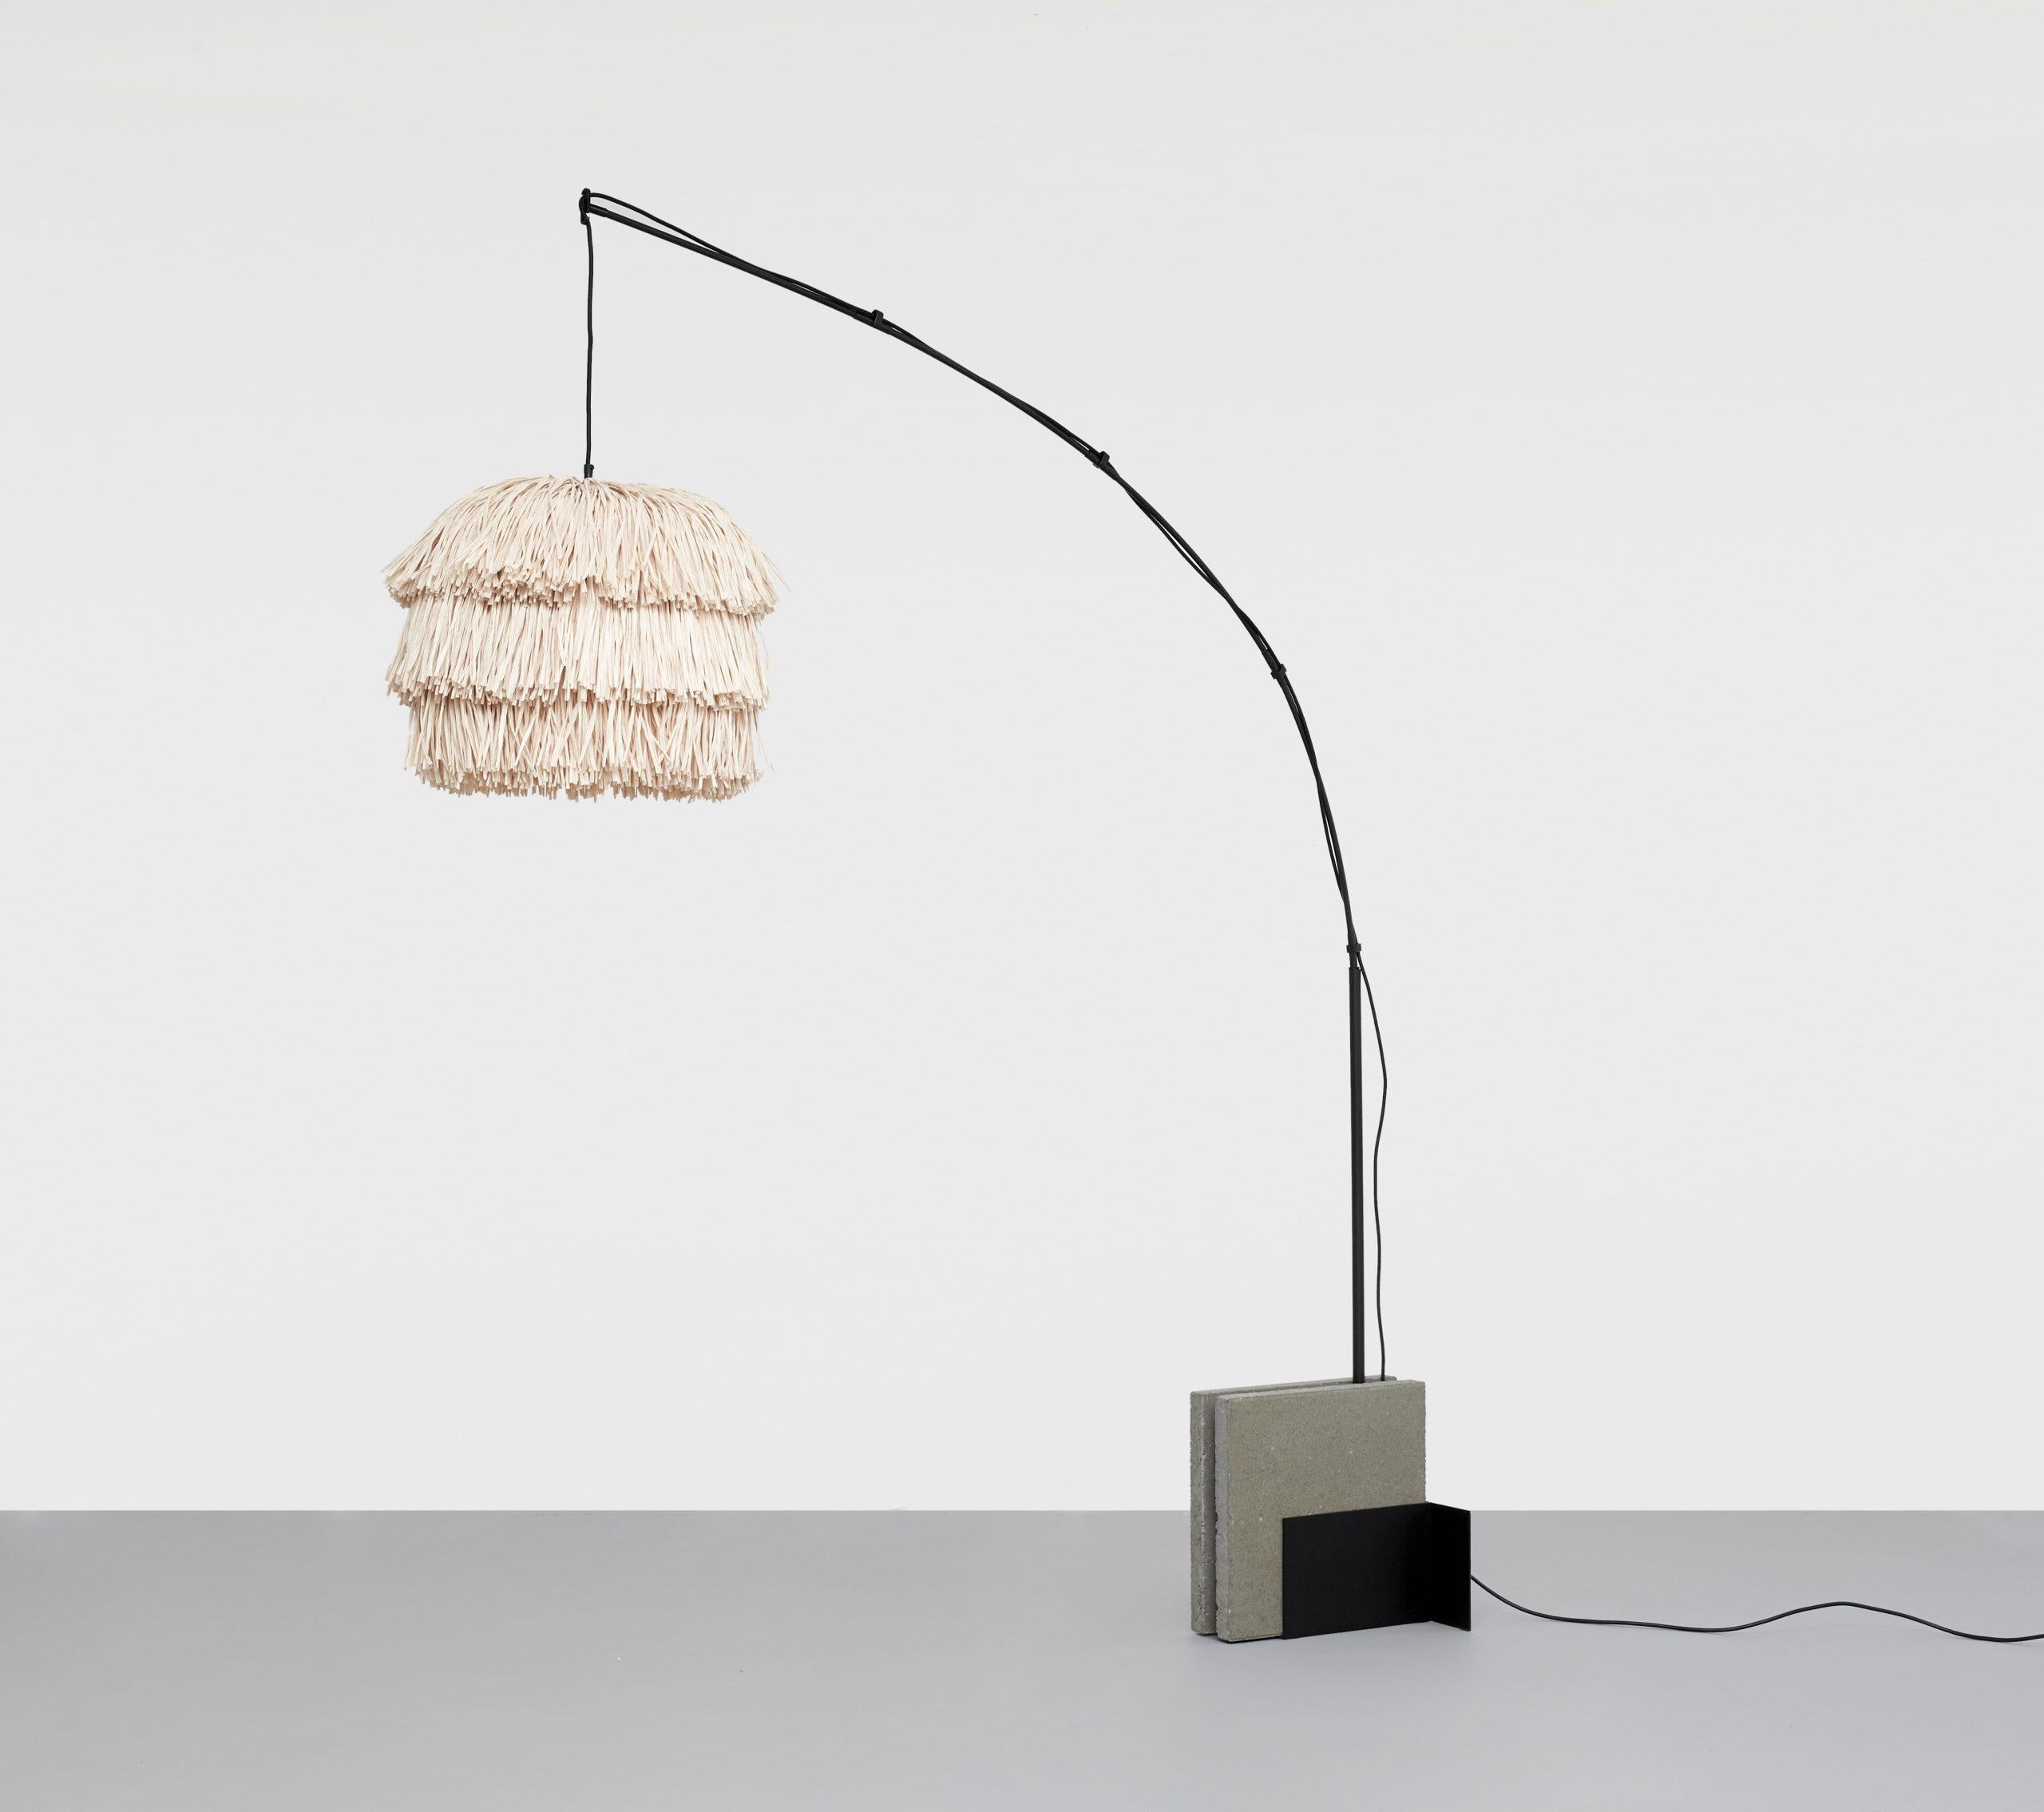 Beige Fran L stand floor lamp by Llot Llov
Handcrafted light object
Dimensions: D 50 x W 205.8 x H 250 cm
Materials: raffia fringes, glass fiber, steel, concrete
Colour: beige
Also available in green, coral, black.

Another member of the FRAN